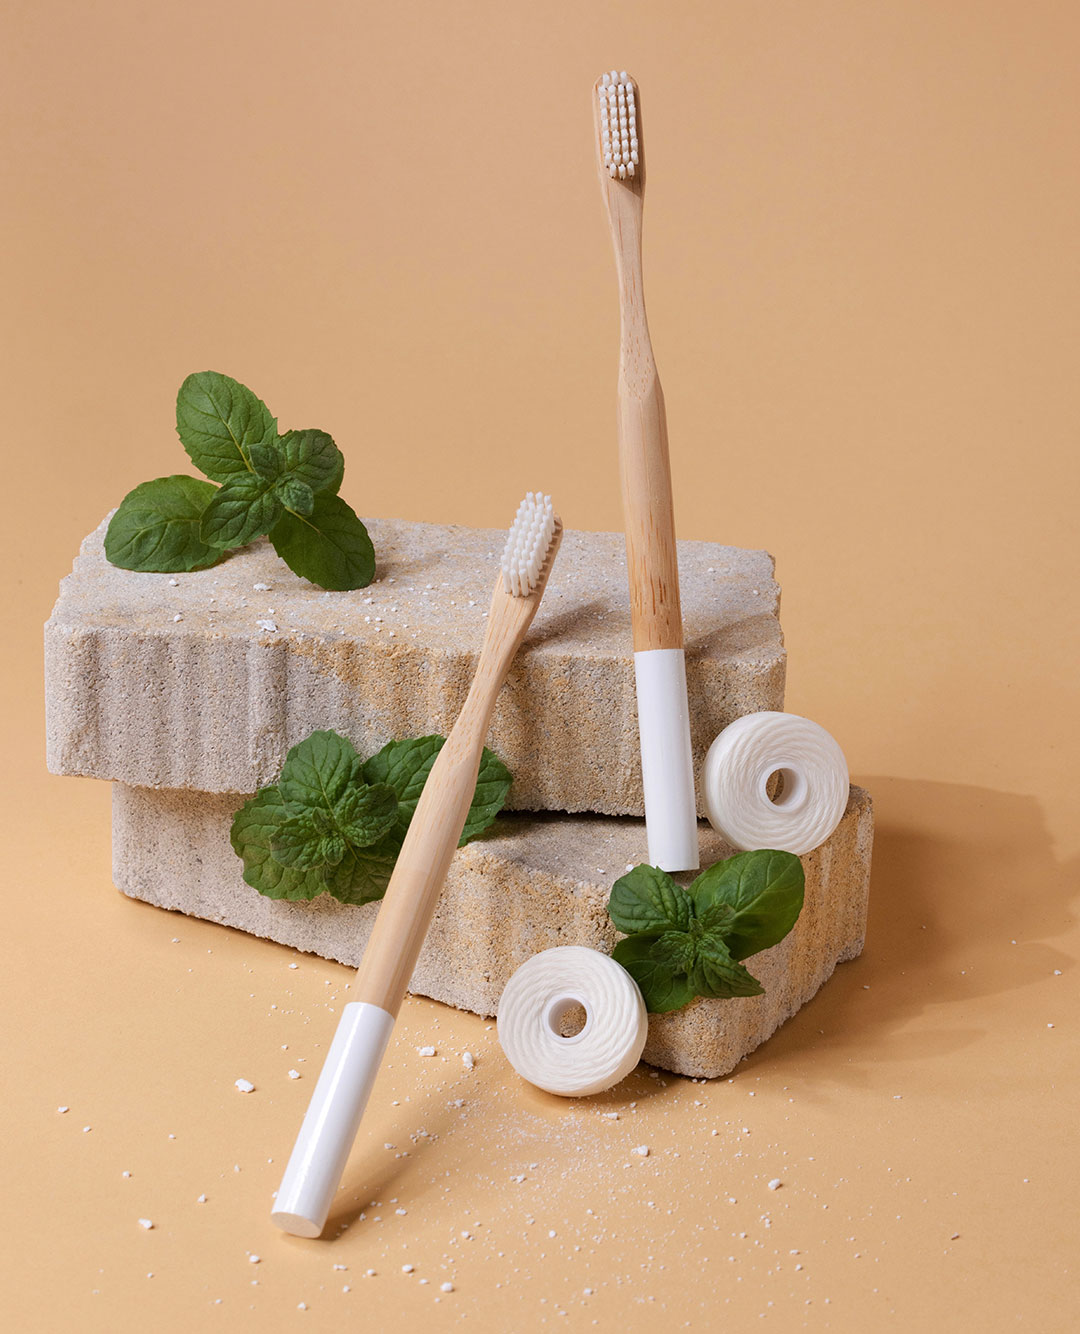 Two sets of bamboo toothbrush on a decorative stone